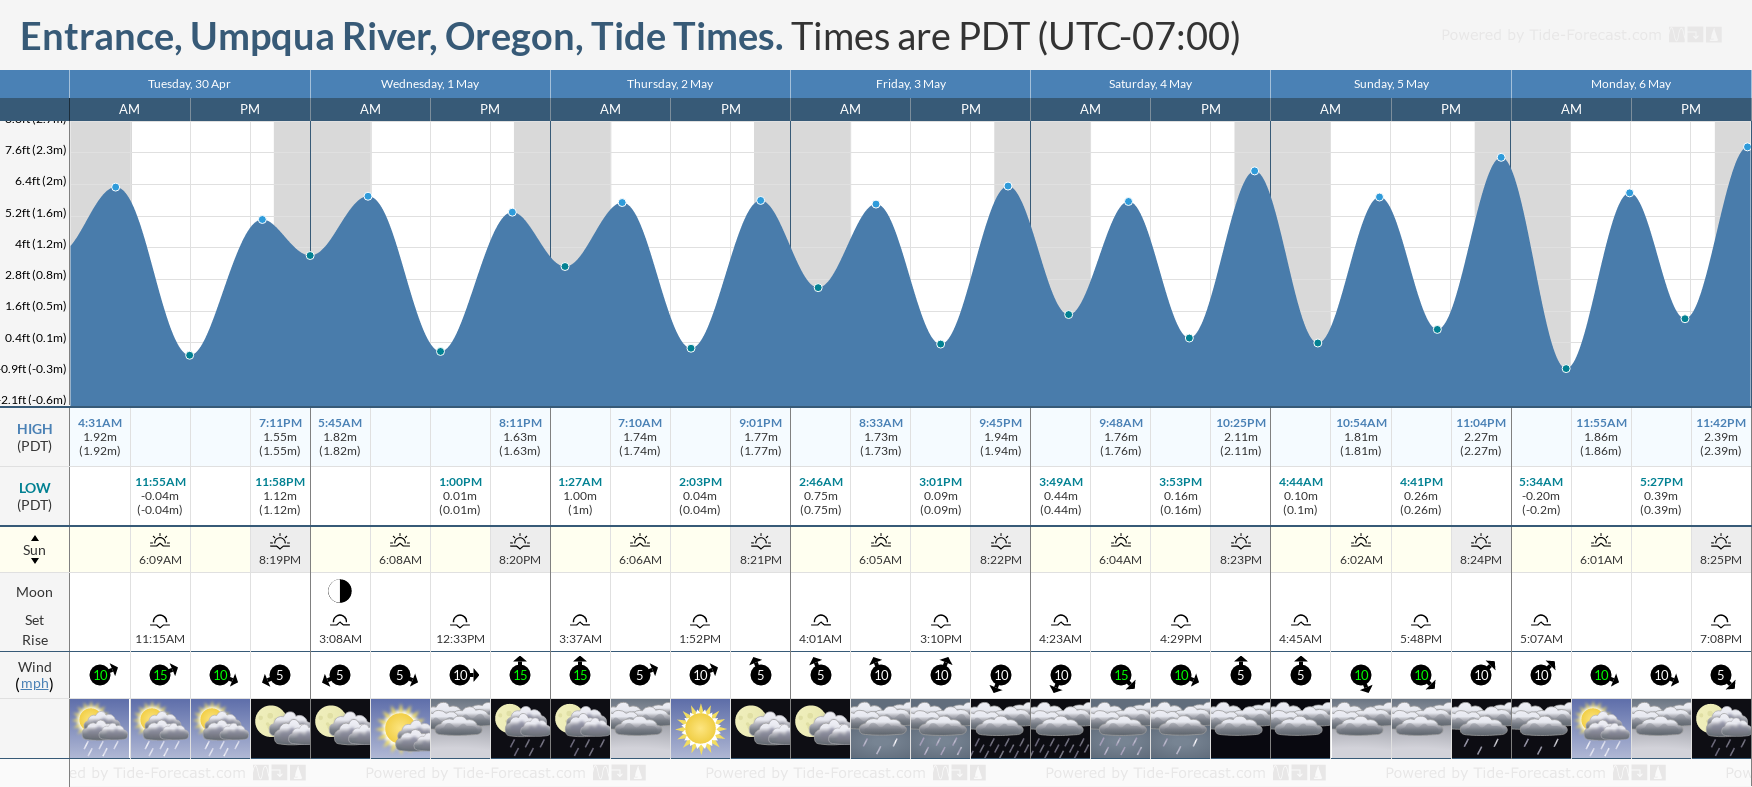 Entrance, Umpqua River, Oregon Tide Chart including high and low tide tide times for the next 7 days